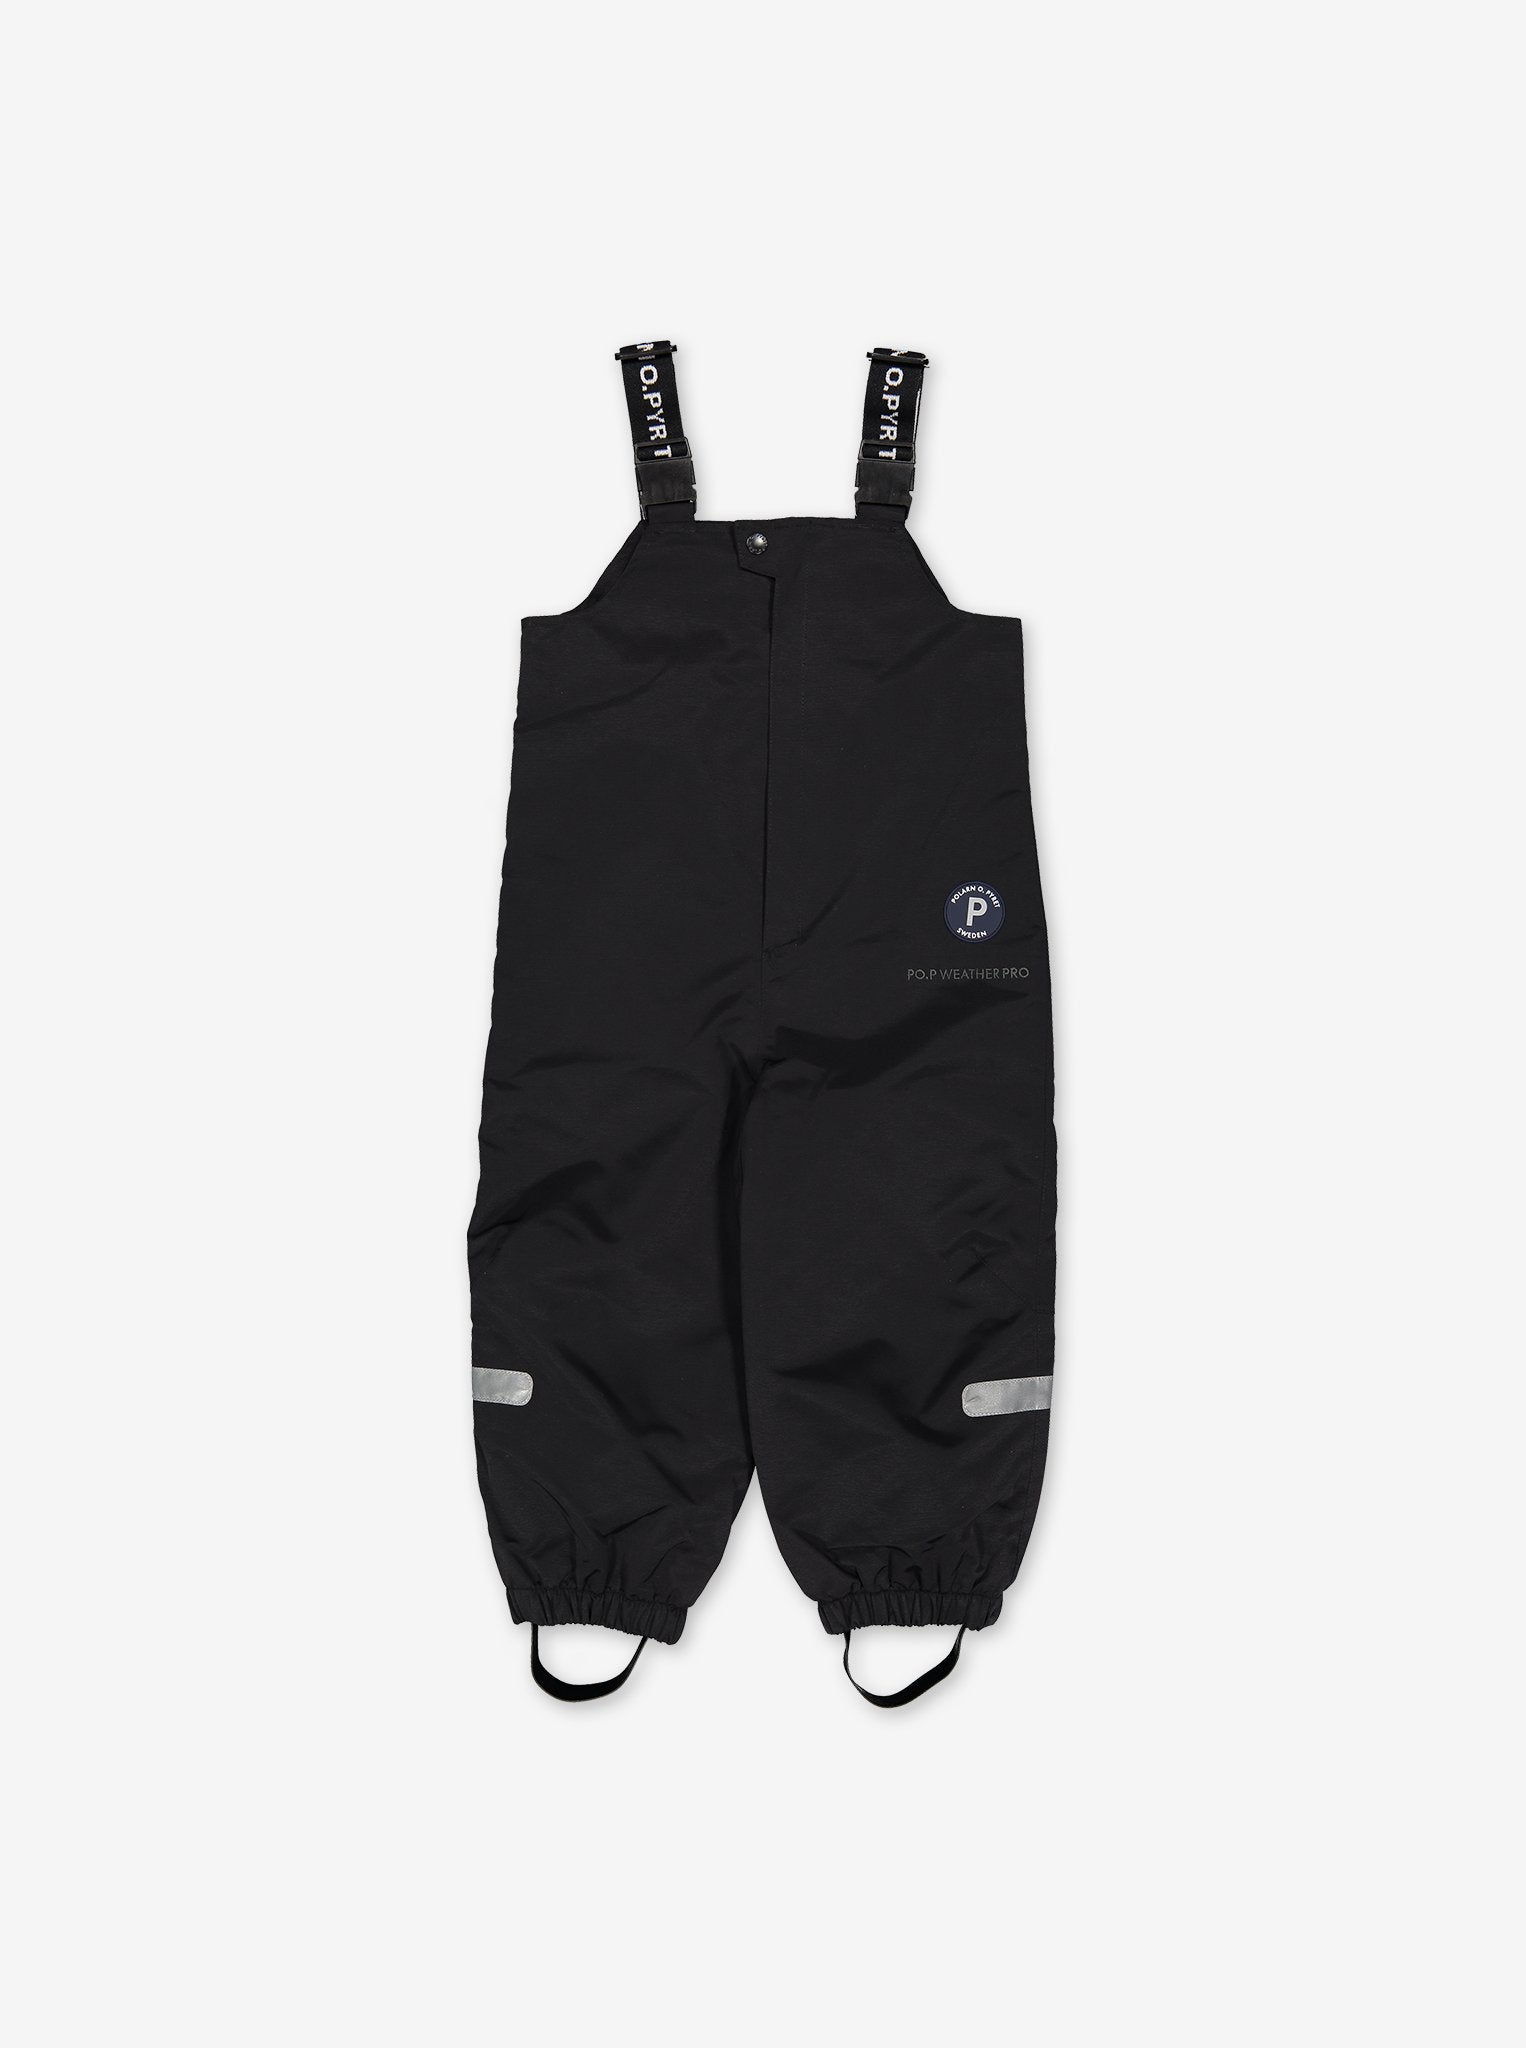 Kids waterproof black dungarees, ethical waterproof warm and comfortably high quality